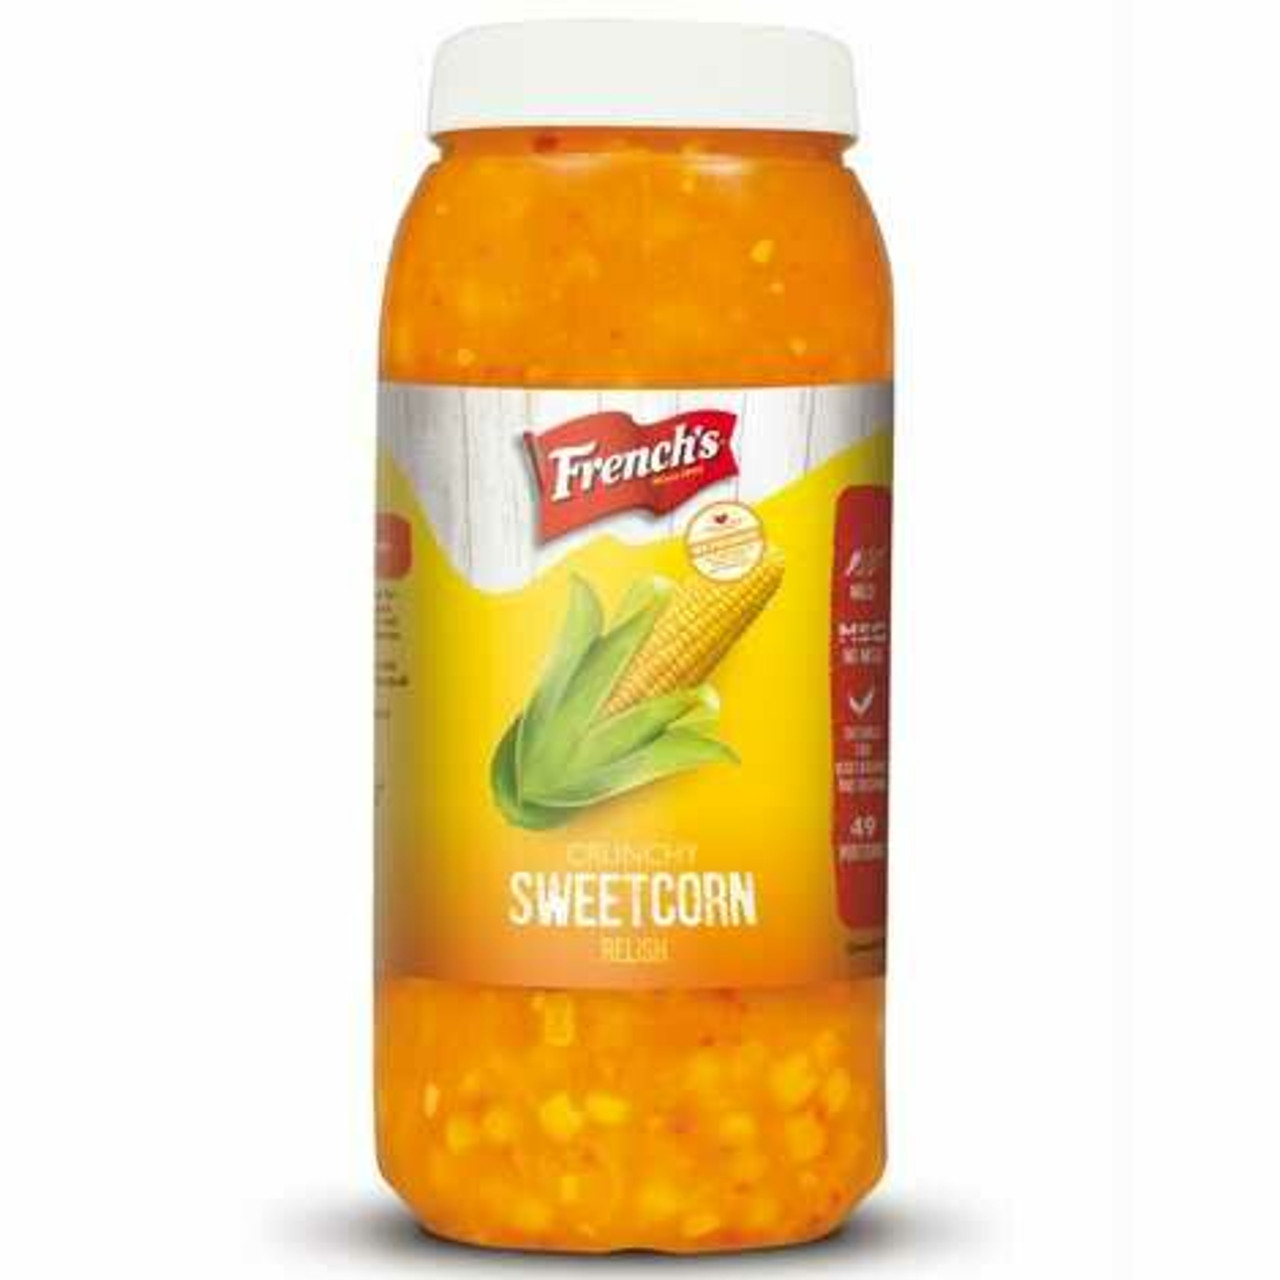 FRENCH'S - SWEETCORN RELISH - 2.45KG